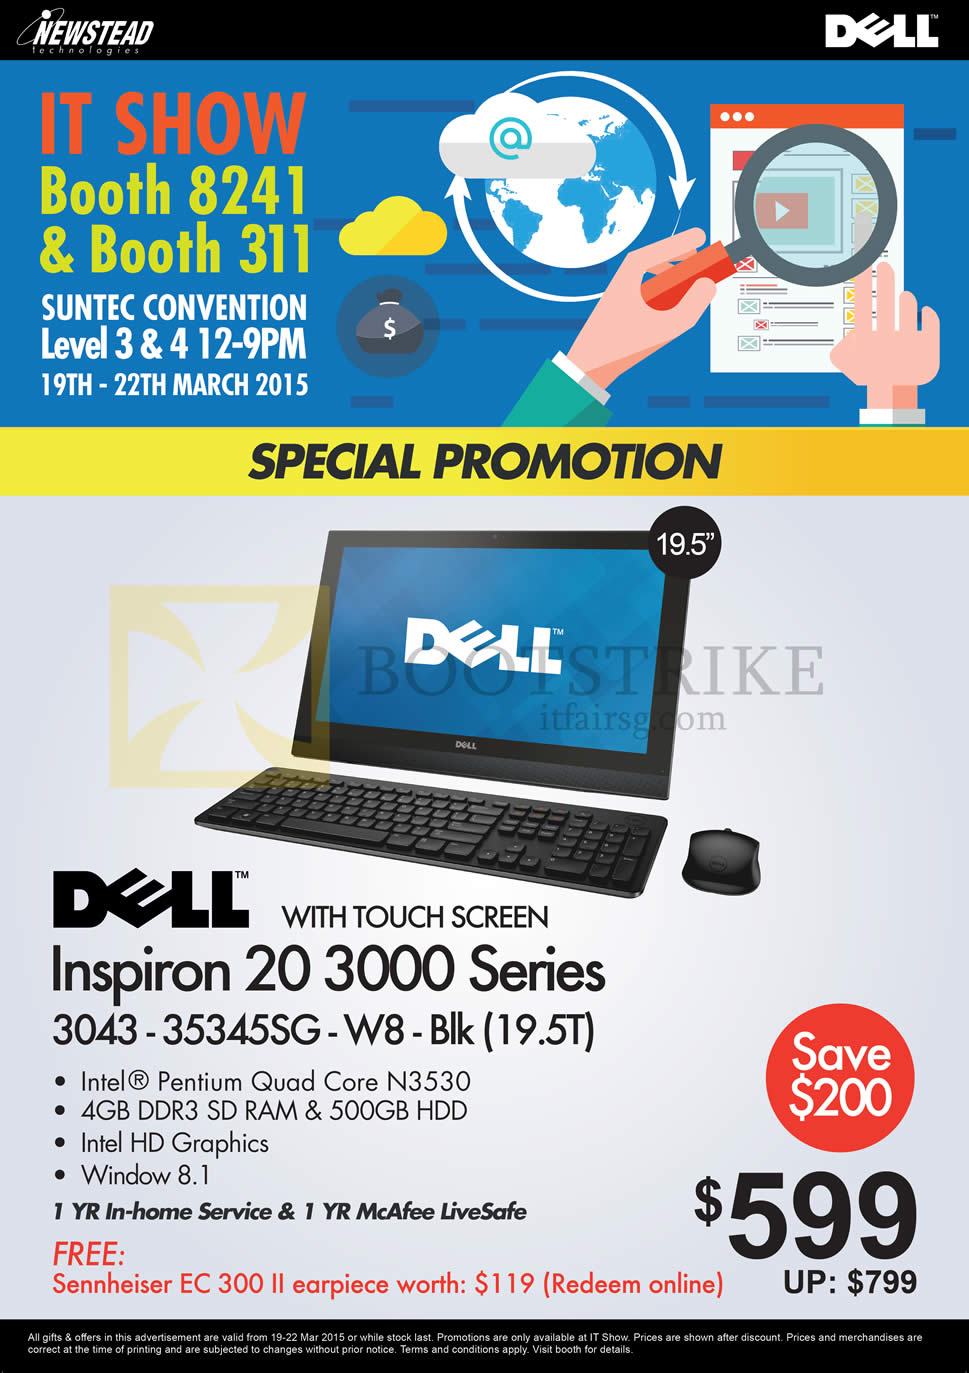 IT SHOW 2015 price list image brochure of Dell Newstead Inspiron 20 3000 Series Notebook